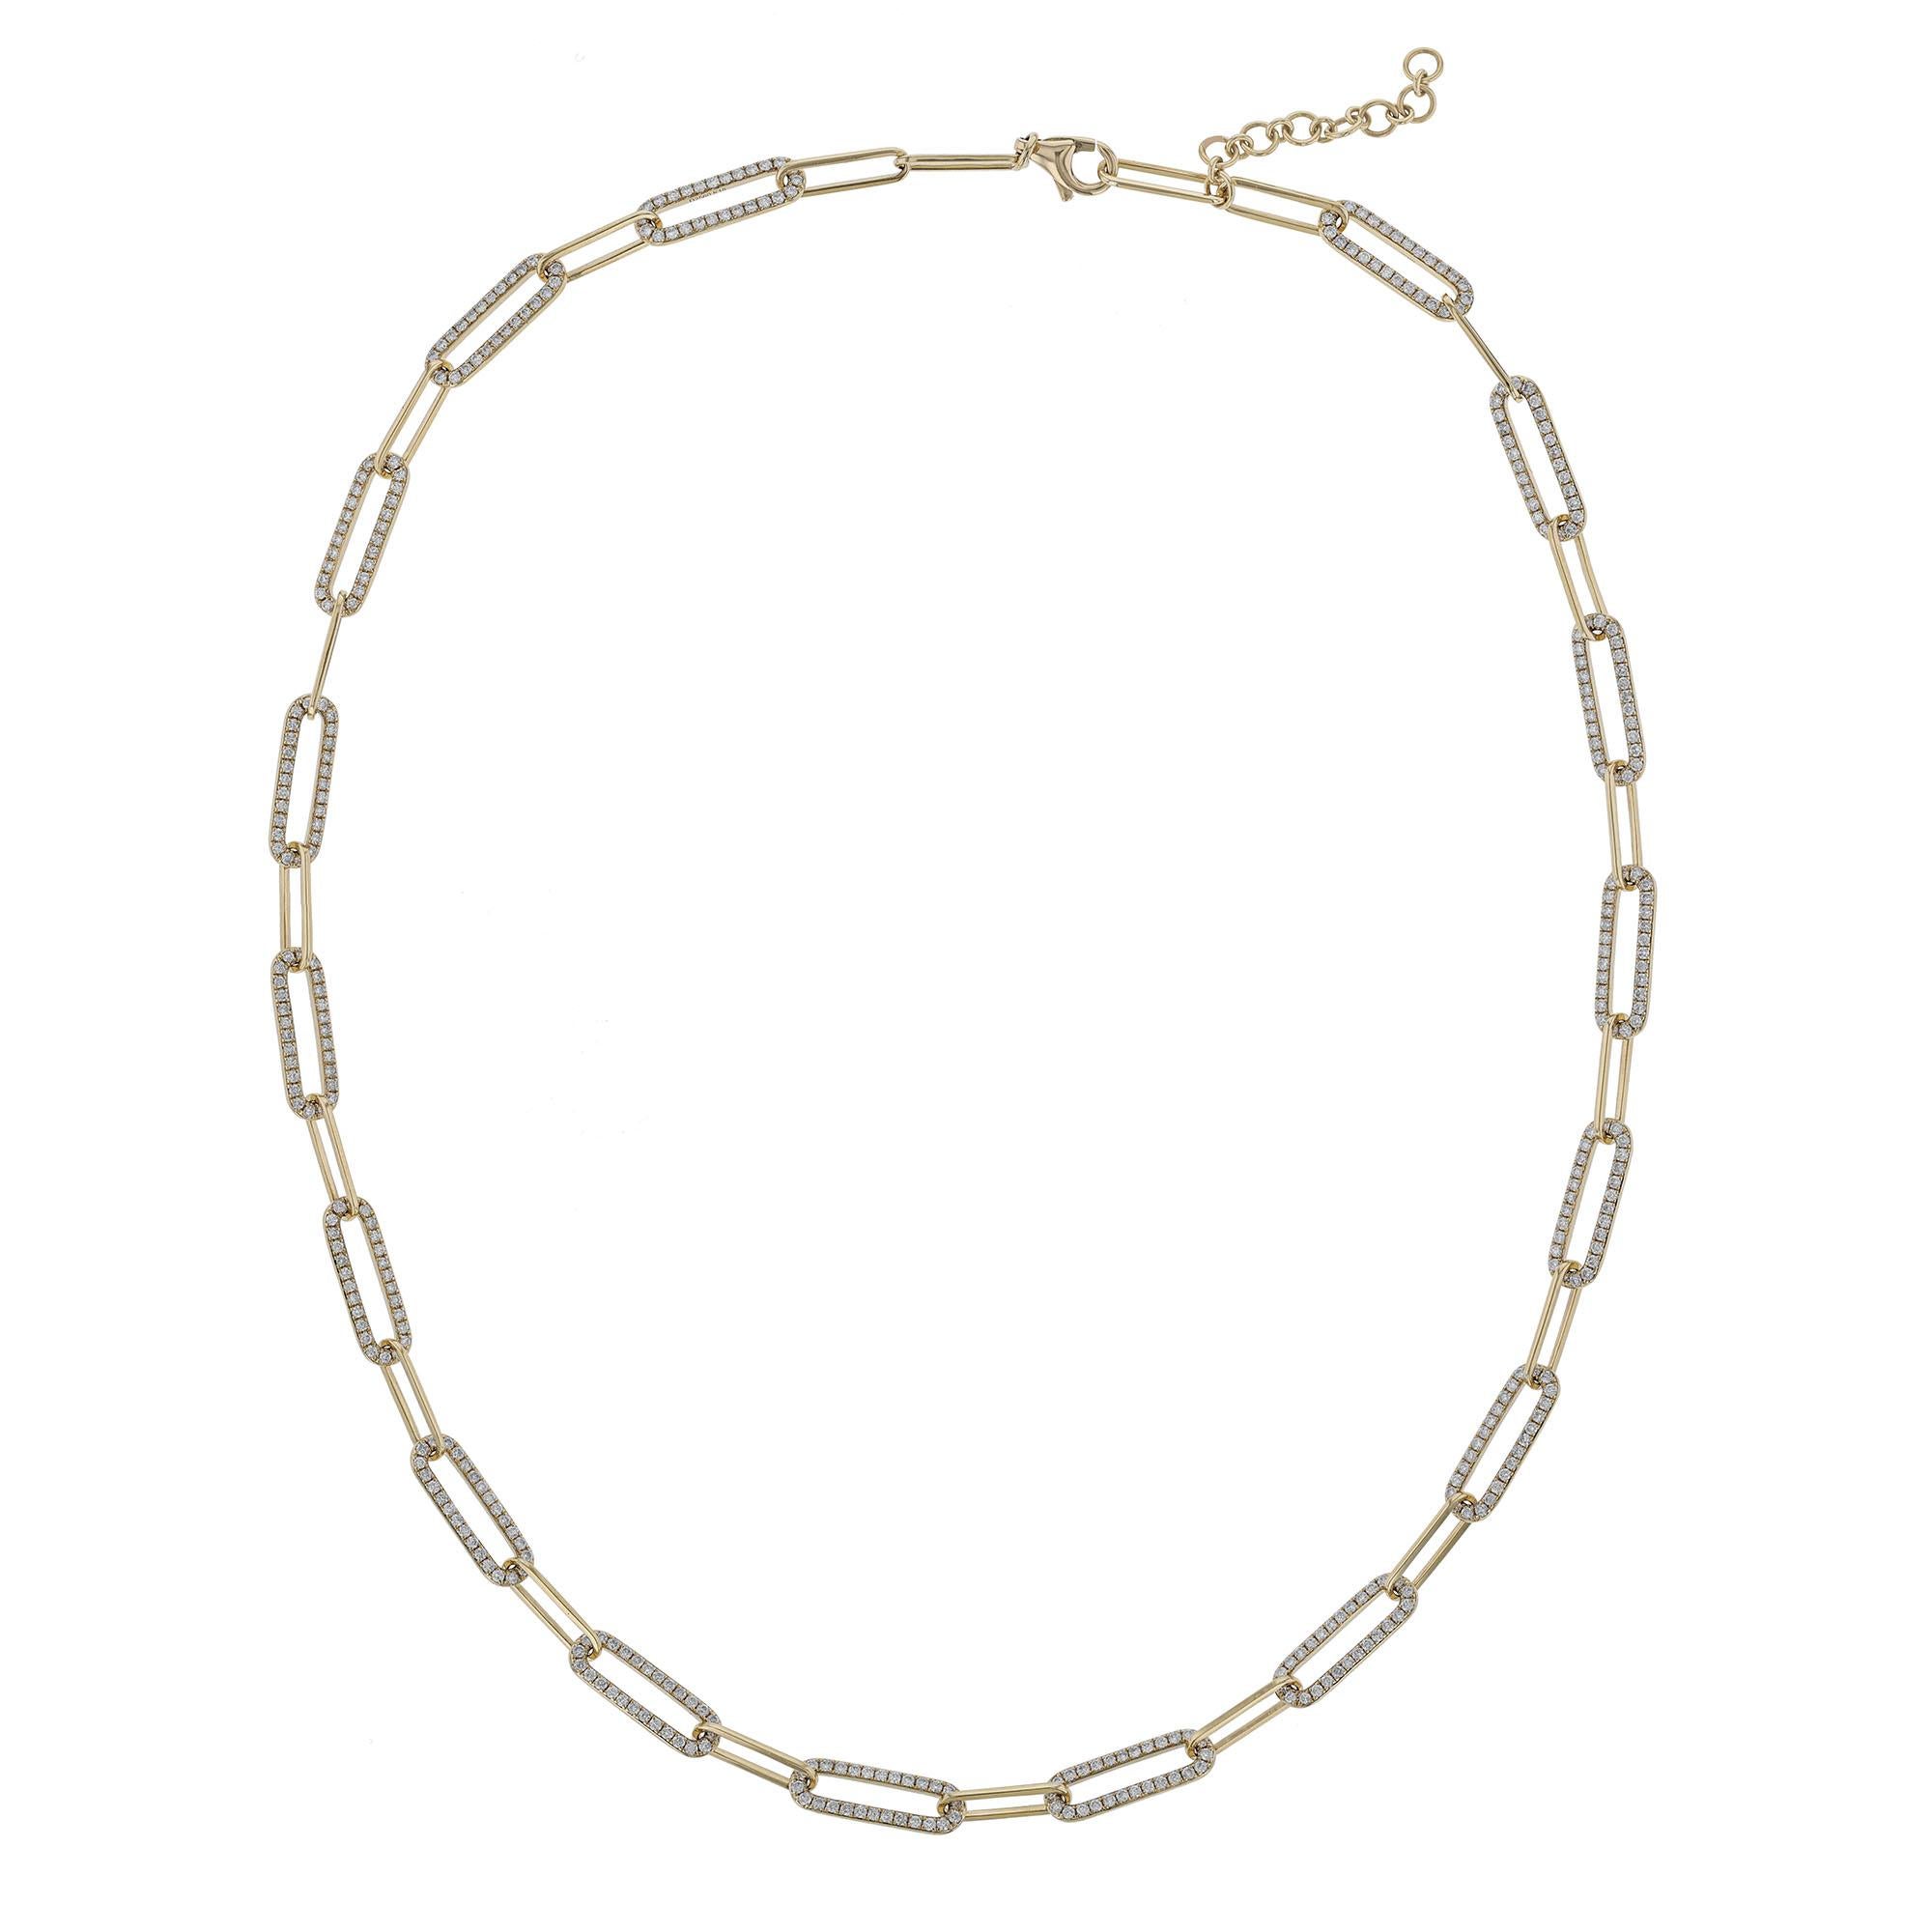 This paperclip necklace is made in 18K yellow gold. It features 442 round cut diamonds weighing 2.56 carats combined. Necklace has a color grade (H) and clarity grade (SI2). All stones are pave' set.



